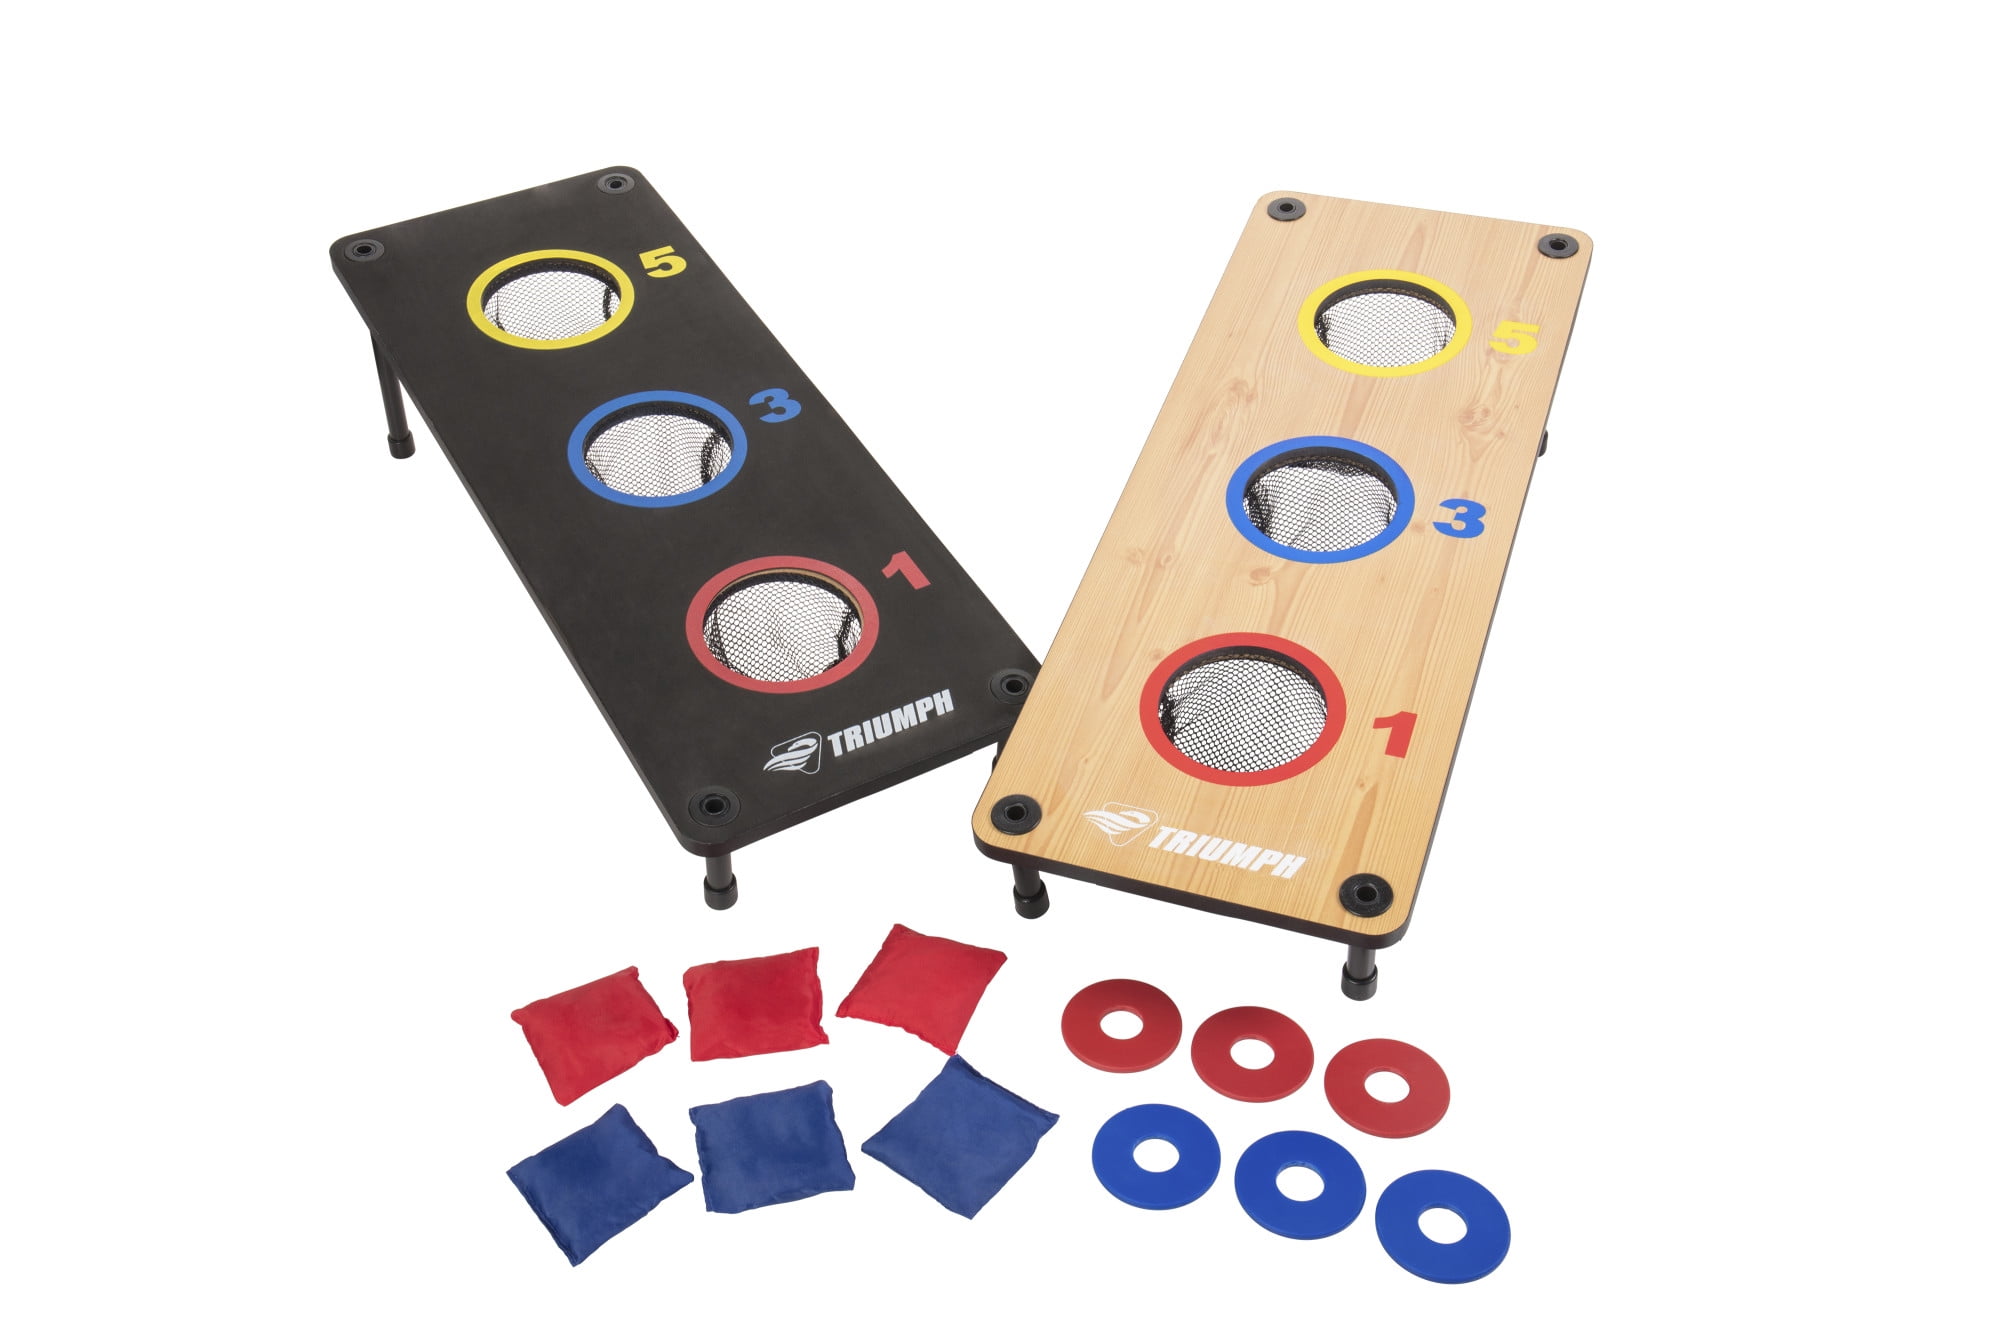 Triumph 2 In 1 Three Hole Bags And Washer Toss Combo With Two Game Platforms Featuring On Board Scoring Six Square Toss Bags And Six Washers Walmart Com Walmart Com